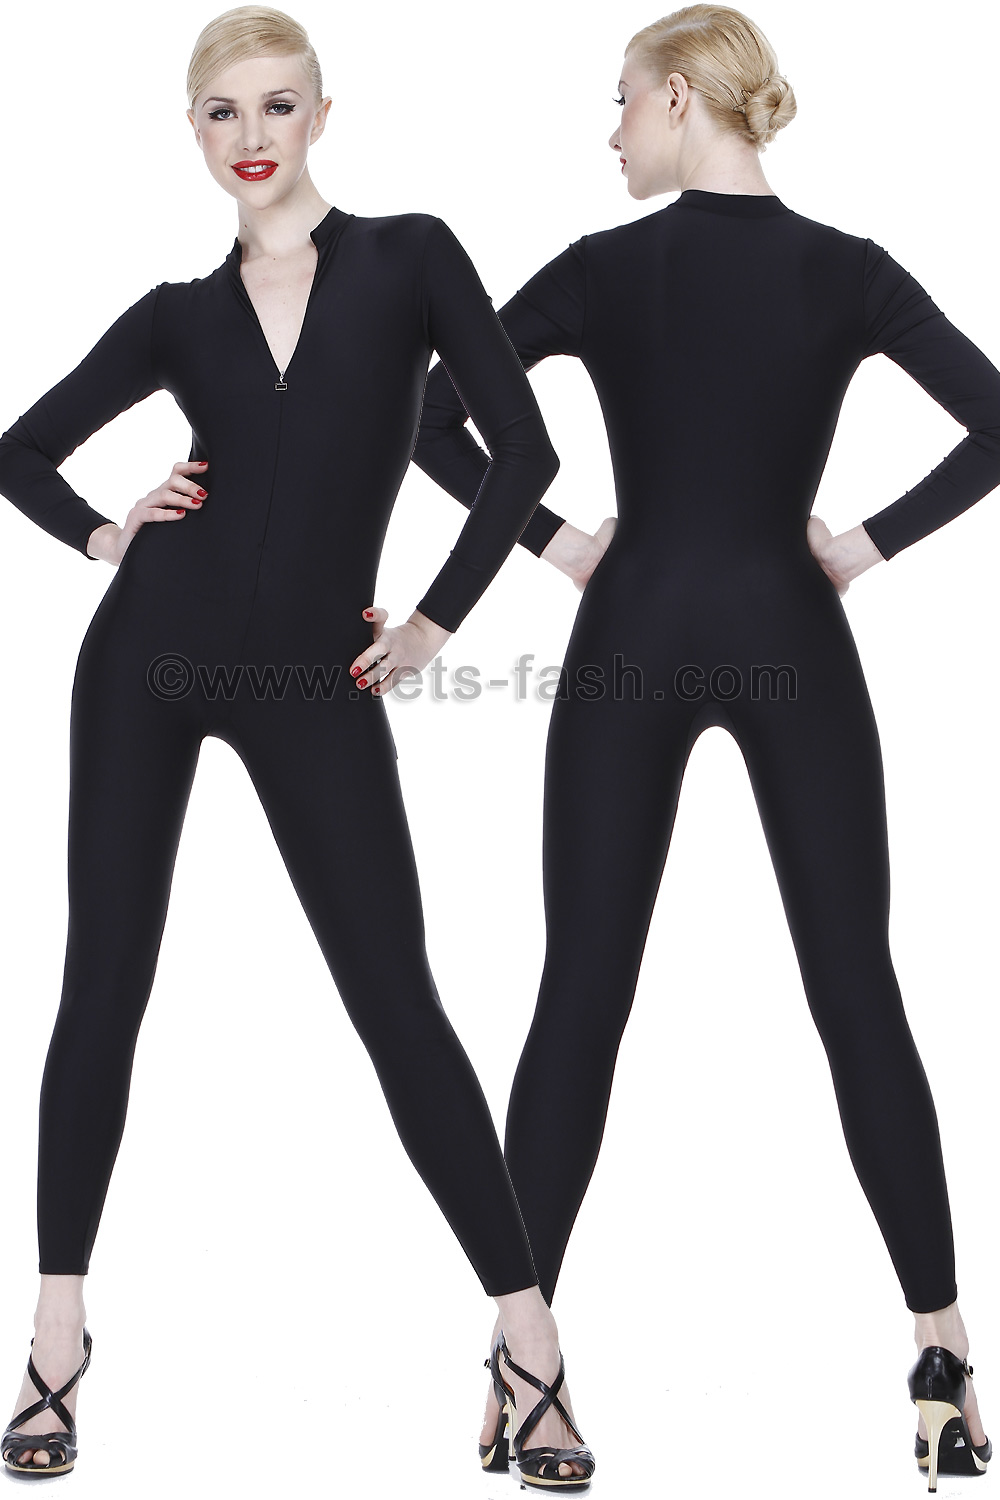 Catsuit With Front Zipper From Fets Fash In All Lycra Colors Flexible And Du 8145